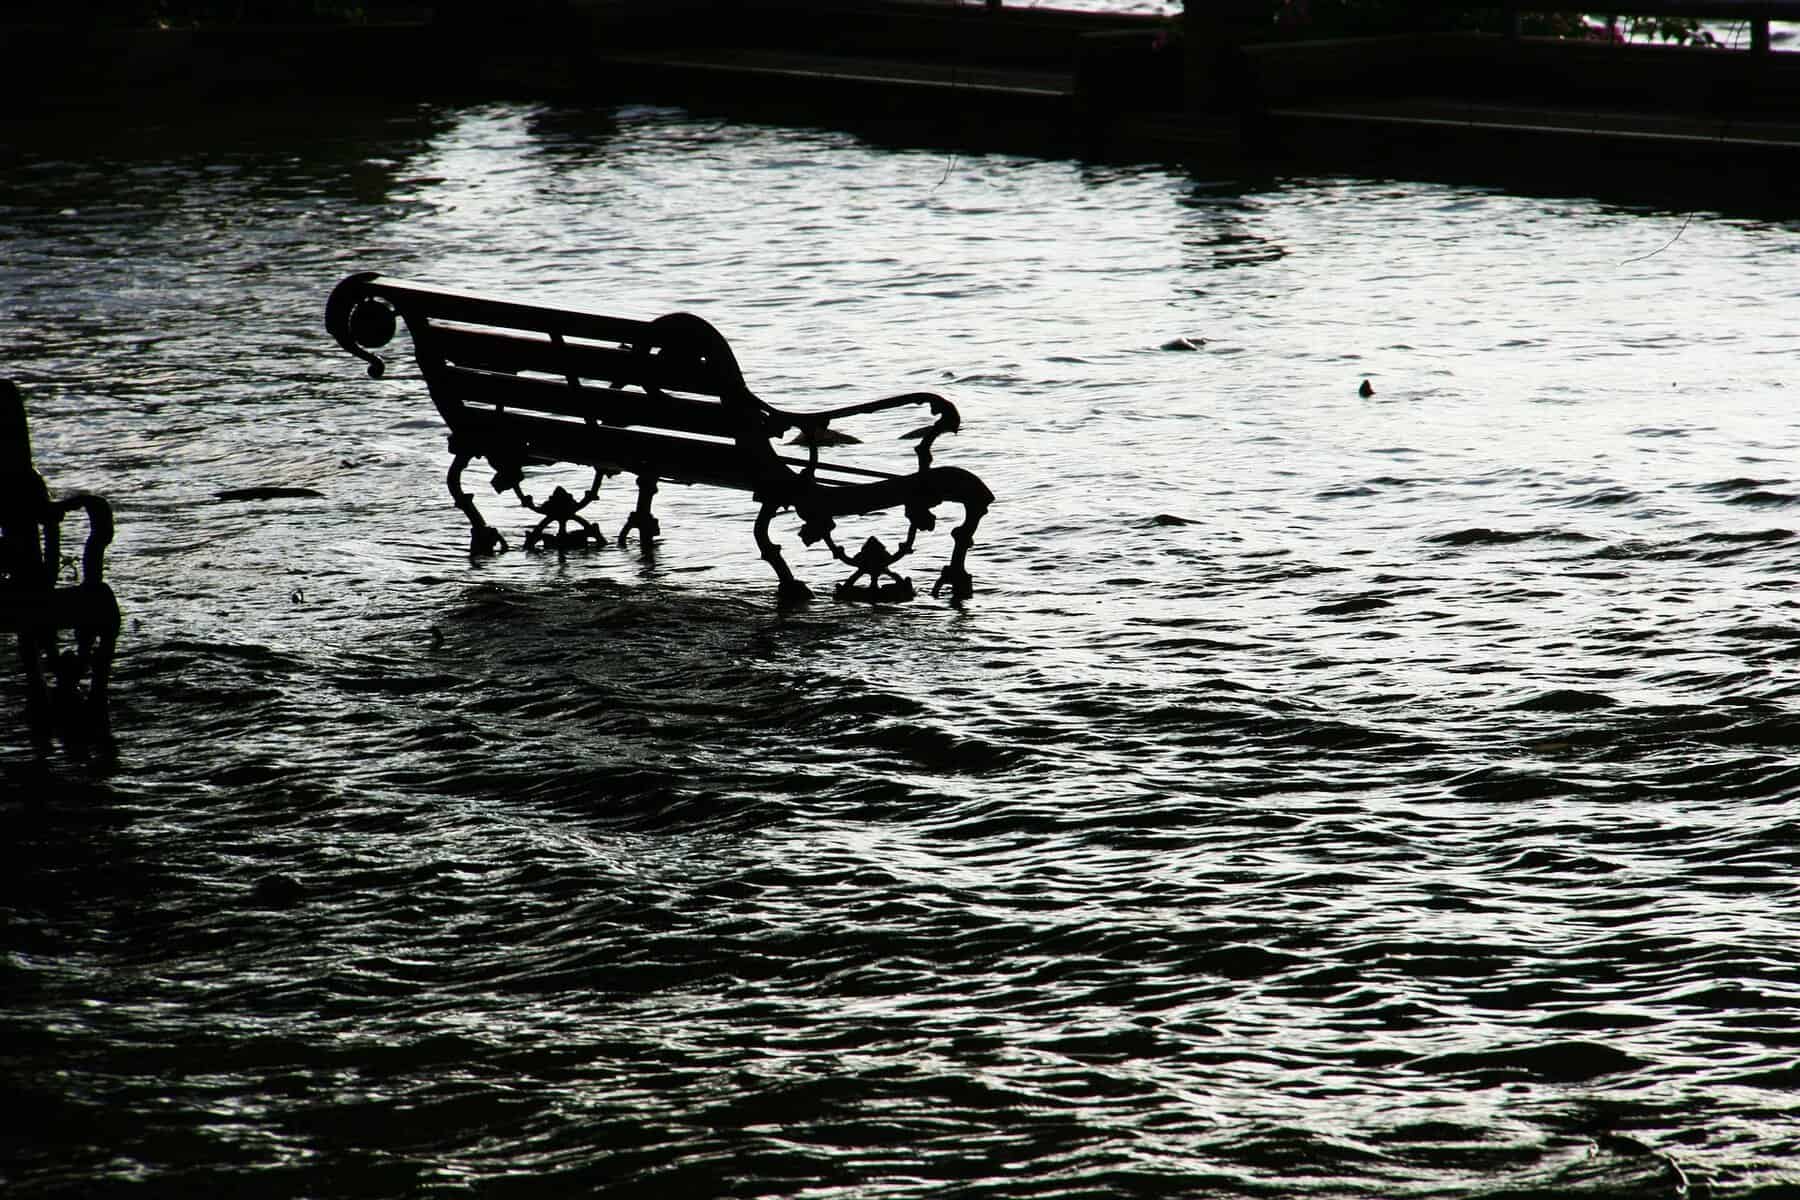 A bench sits surrounded by floodwaters in this black and white image.